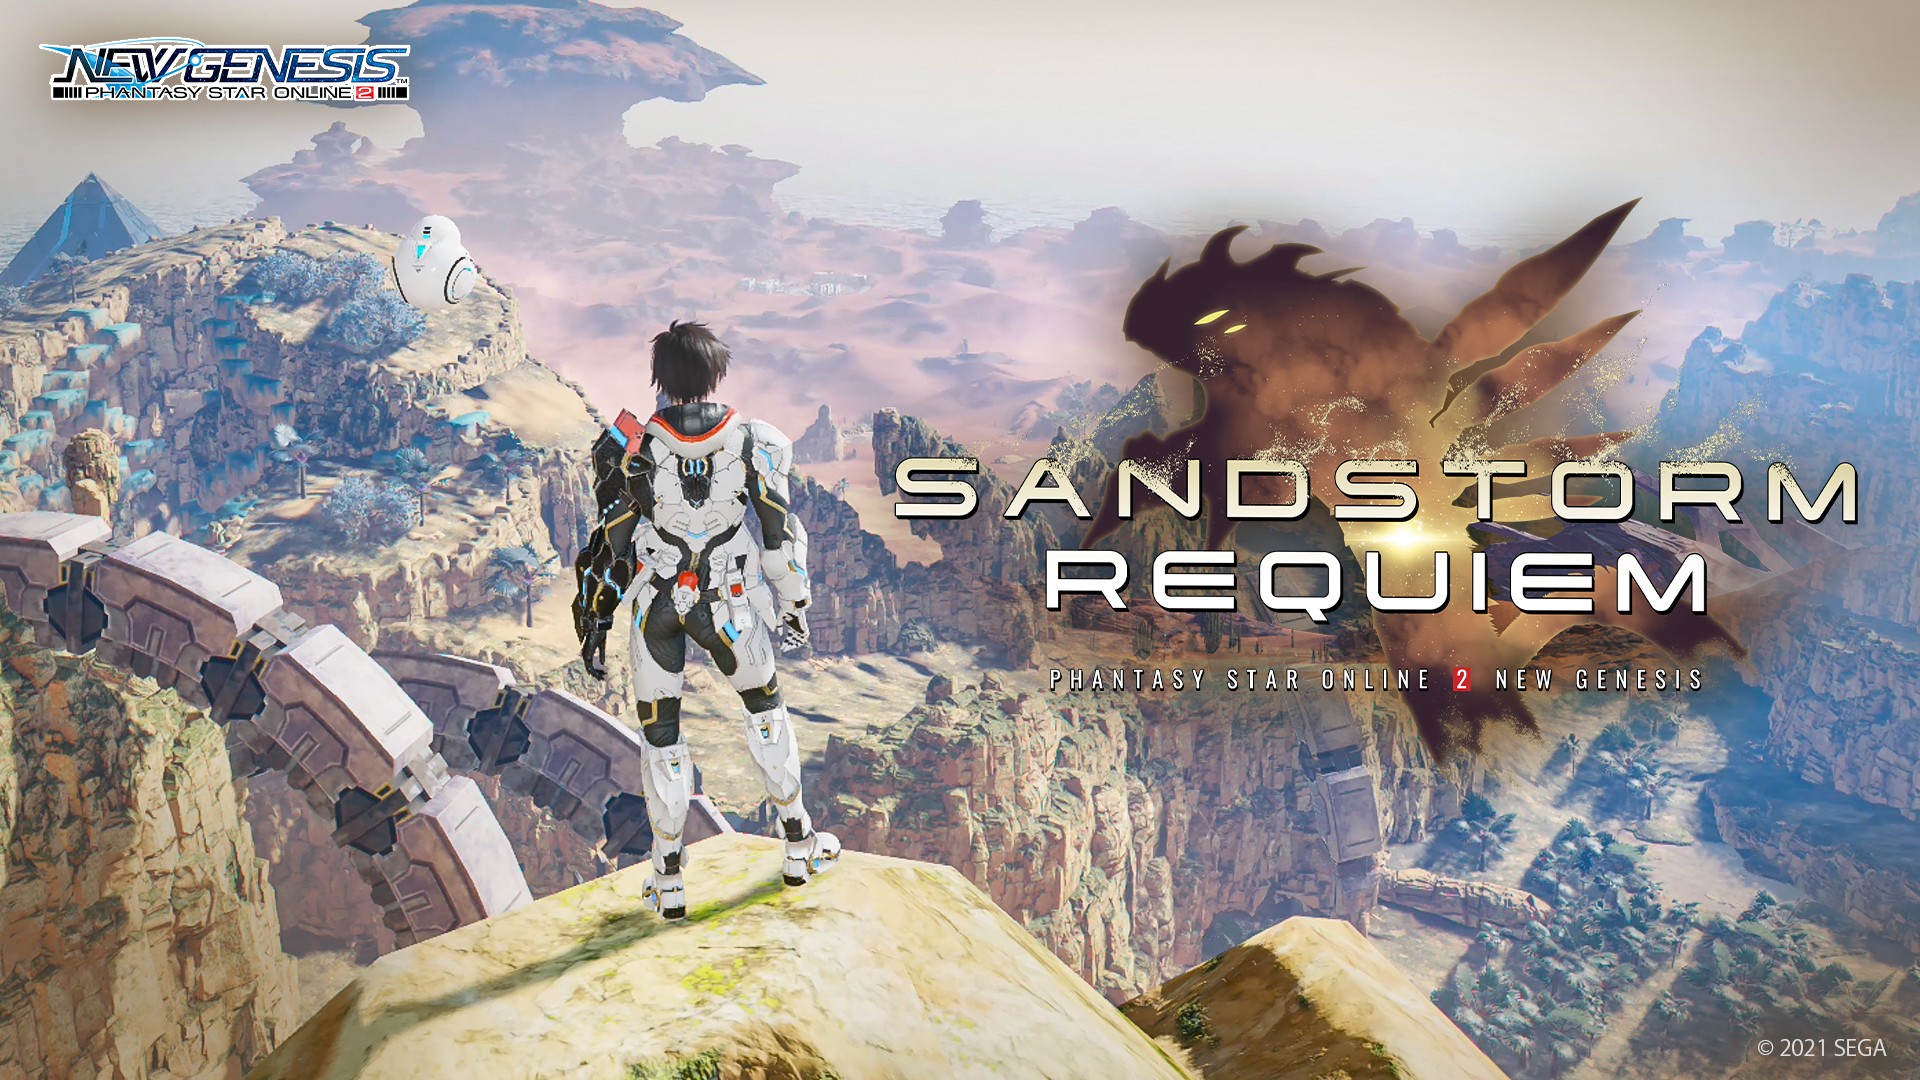 Video For Phantasy Star Online 2 New Genesis: The Sands of Retem are Calling